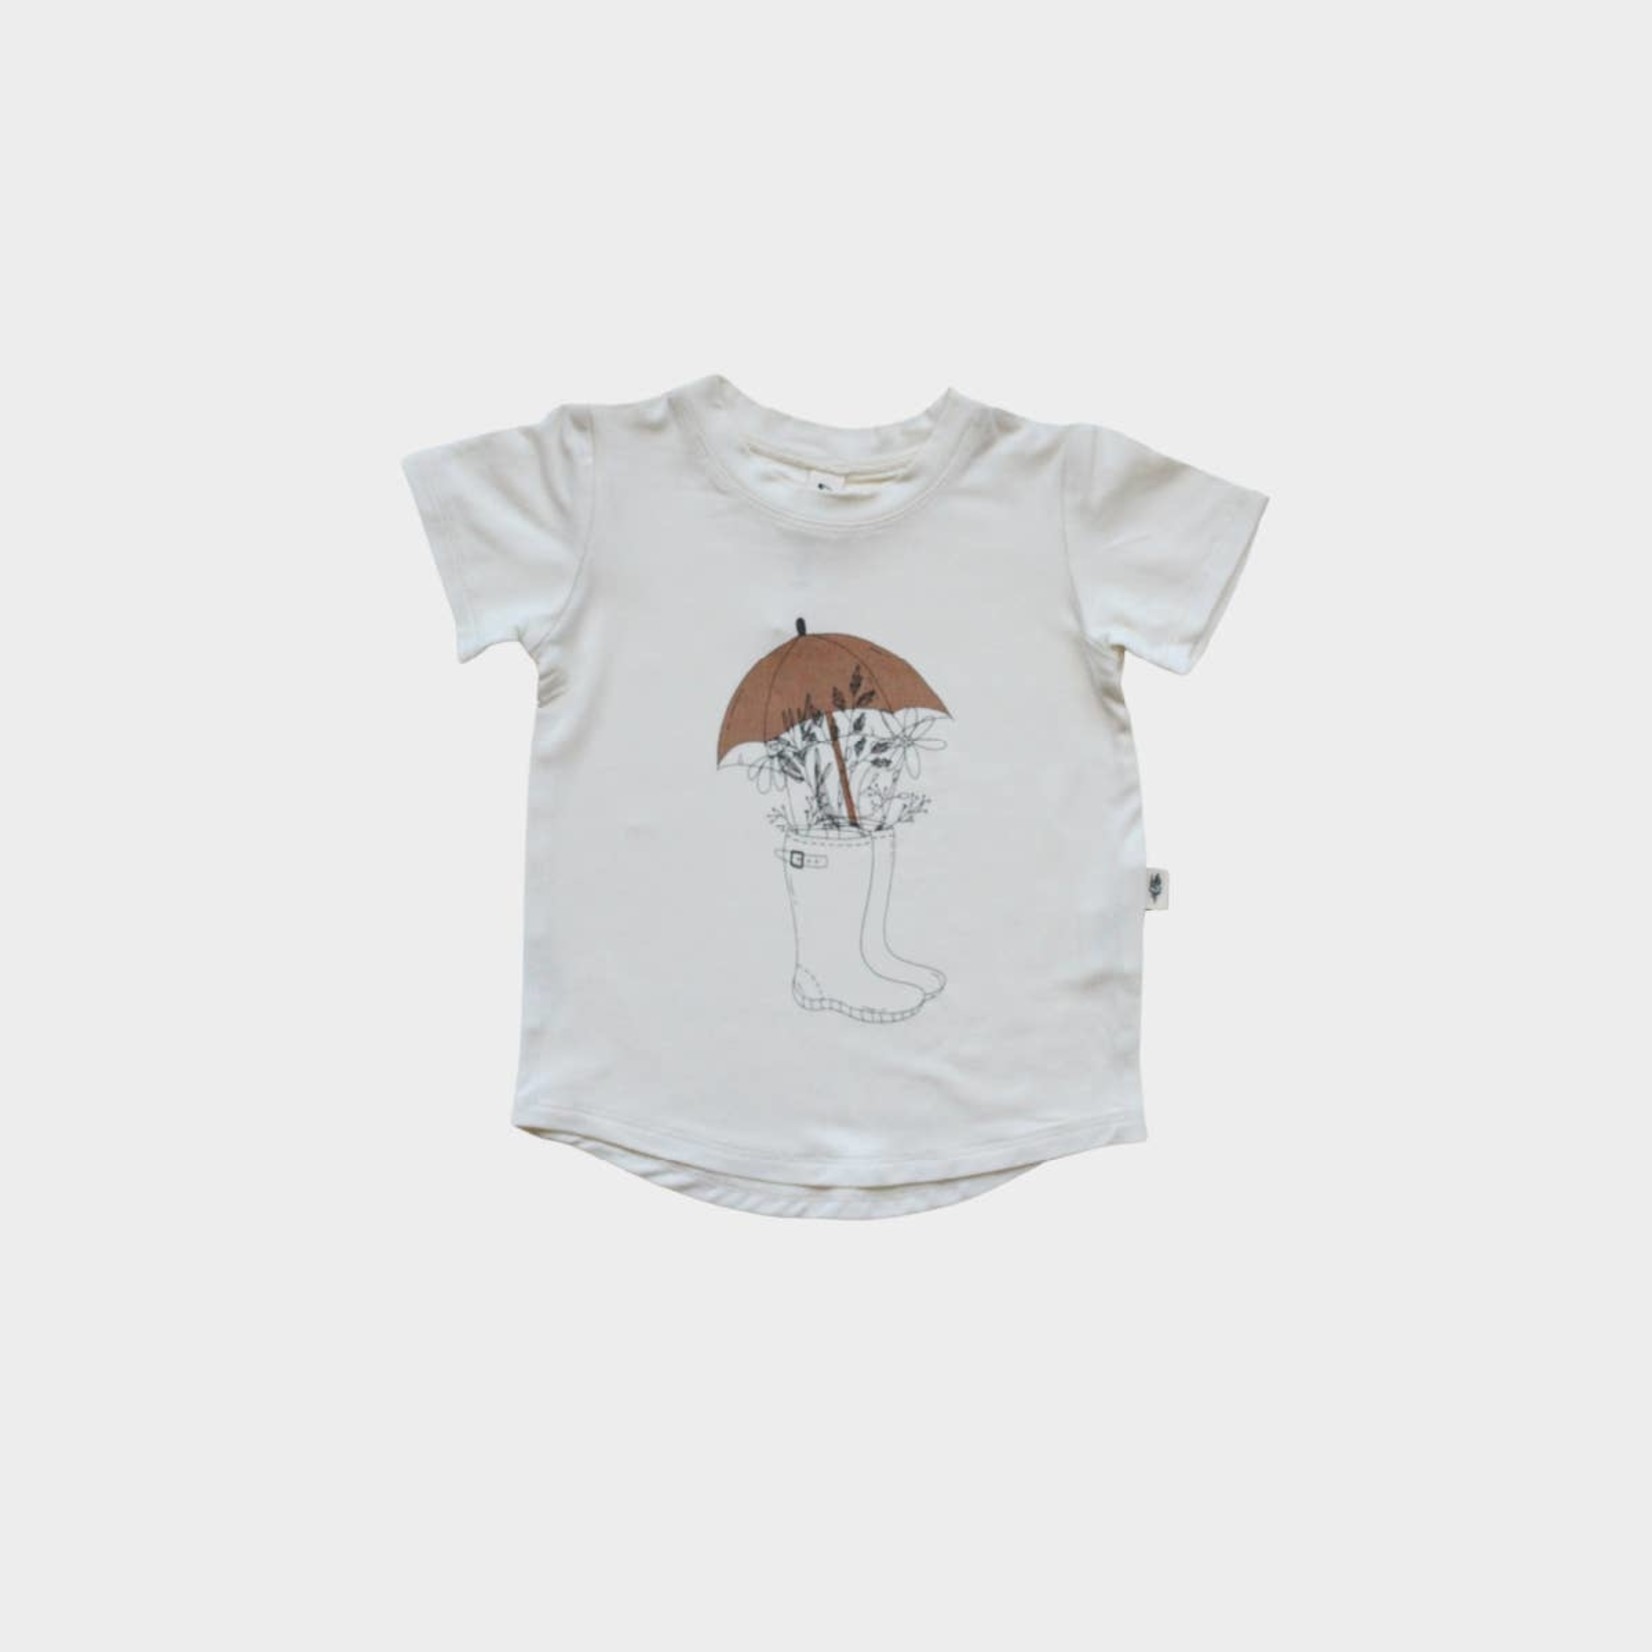 babysprouts clothing company Screen-Printed Tee in Umbrella